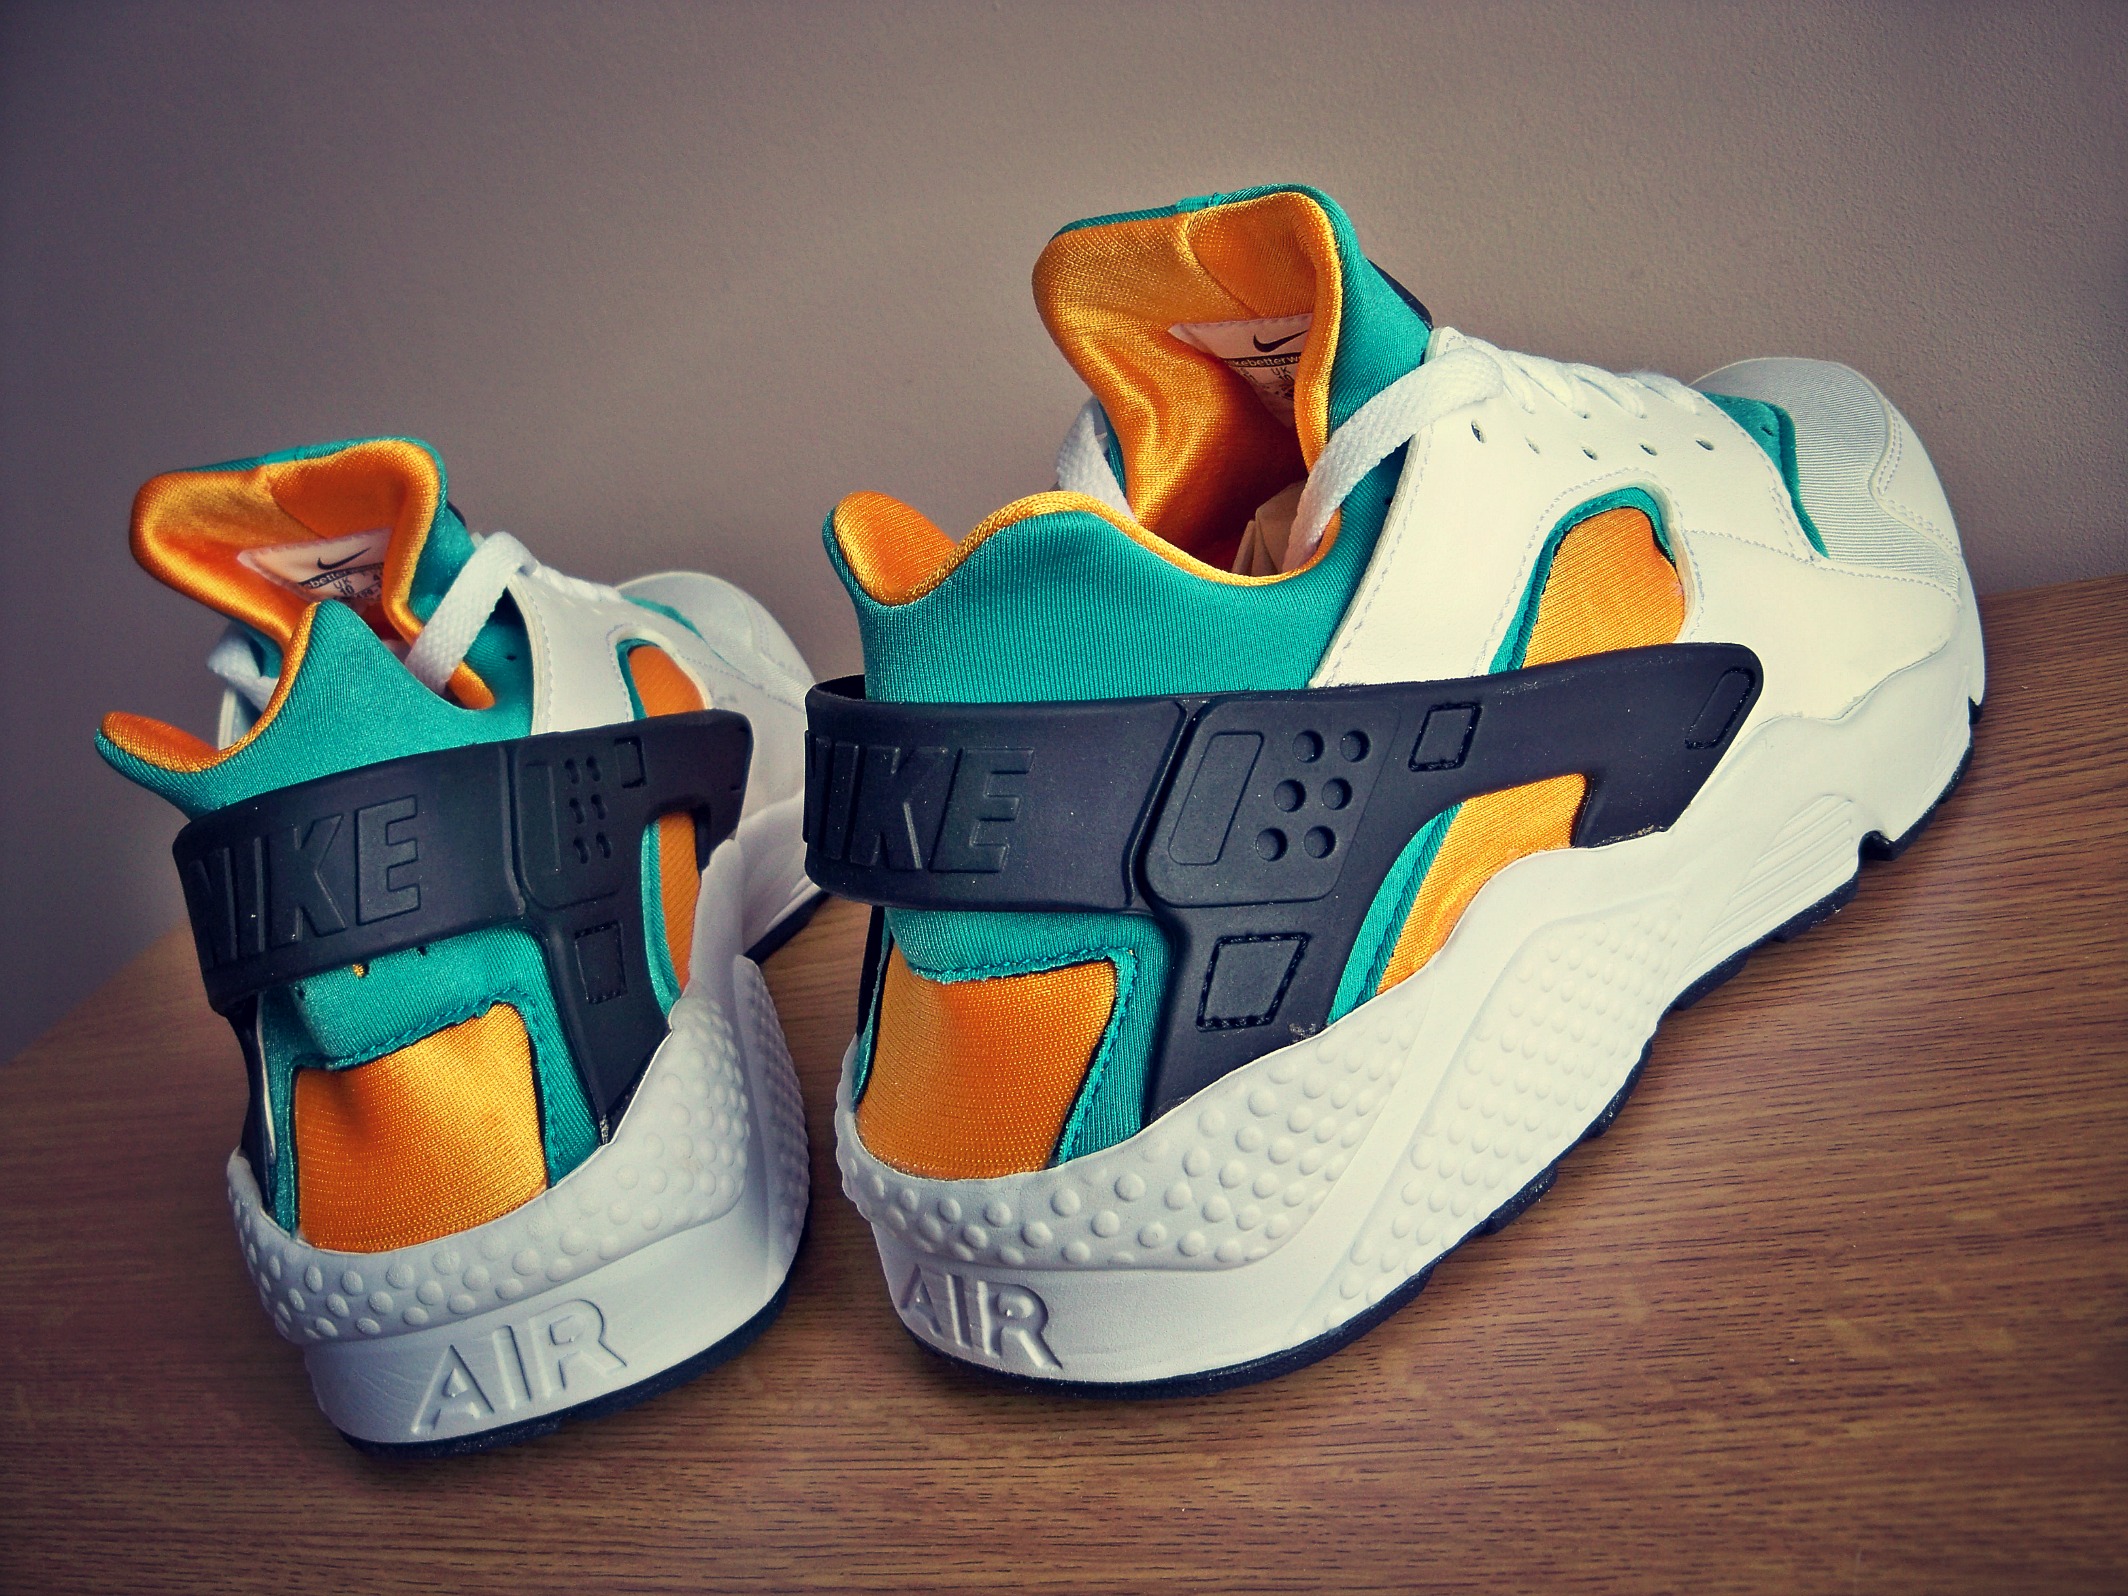 show me a picture of huaraches